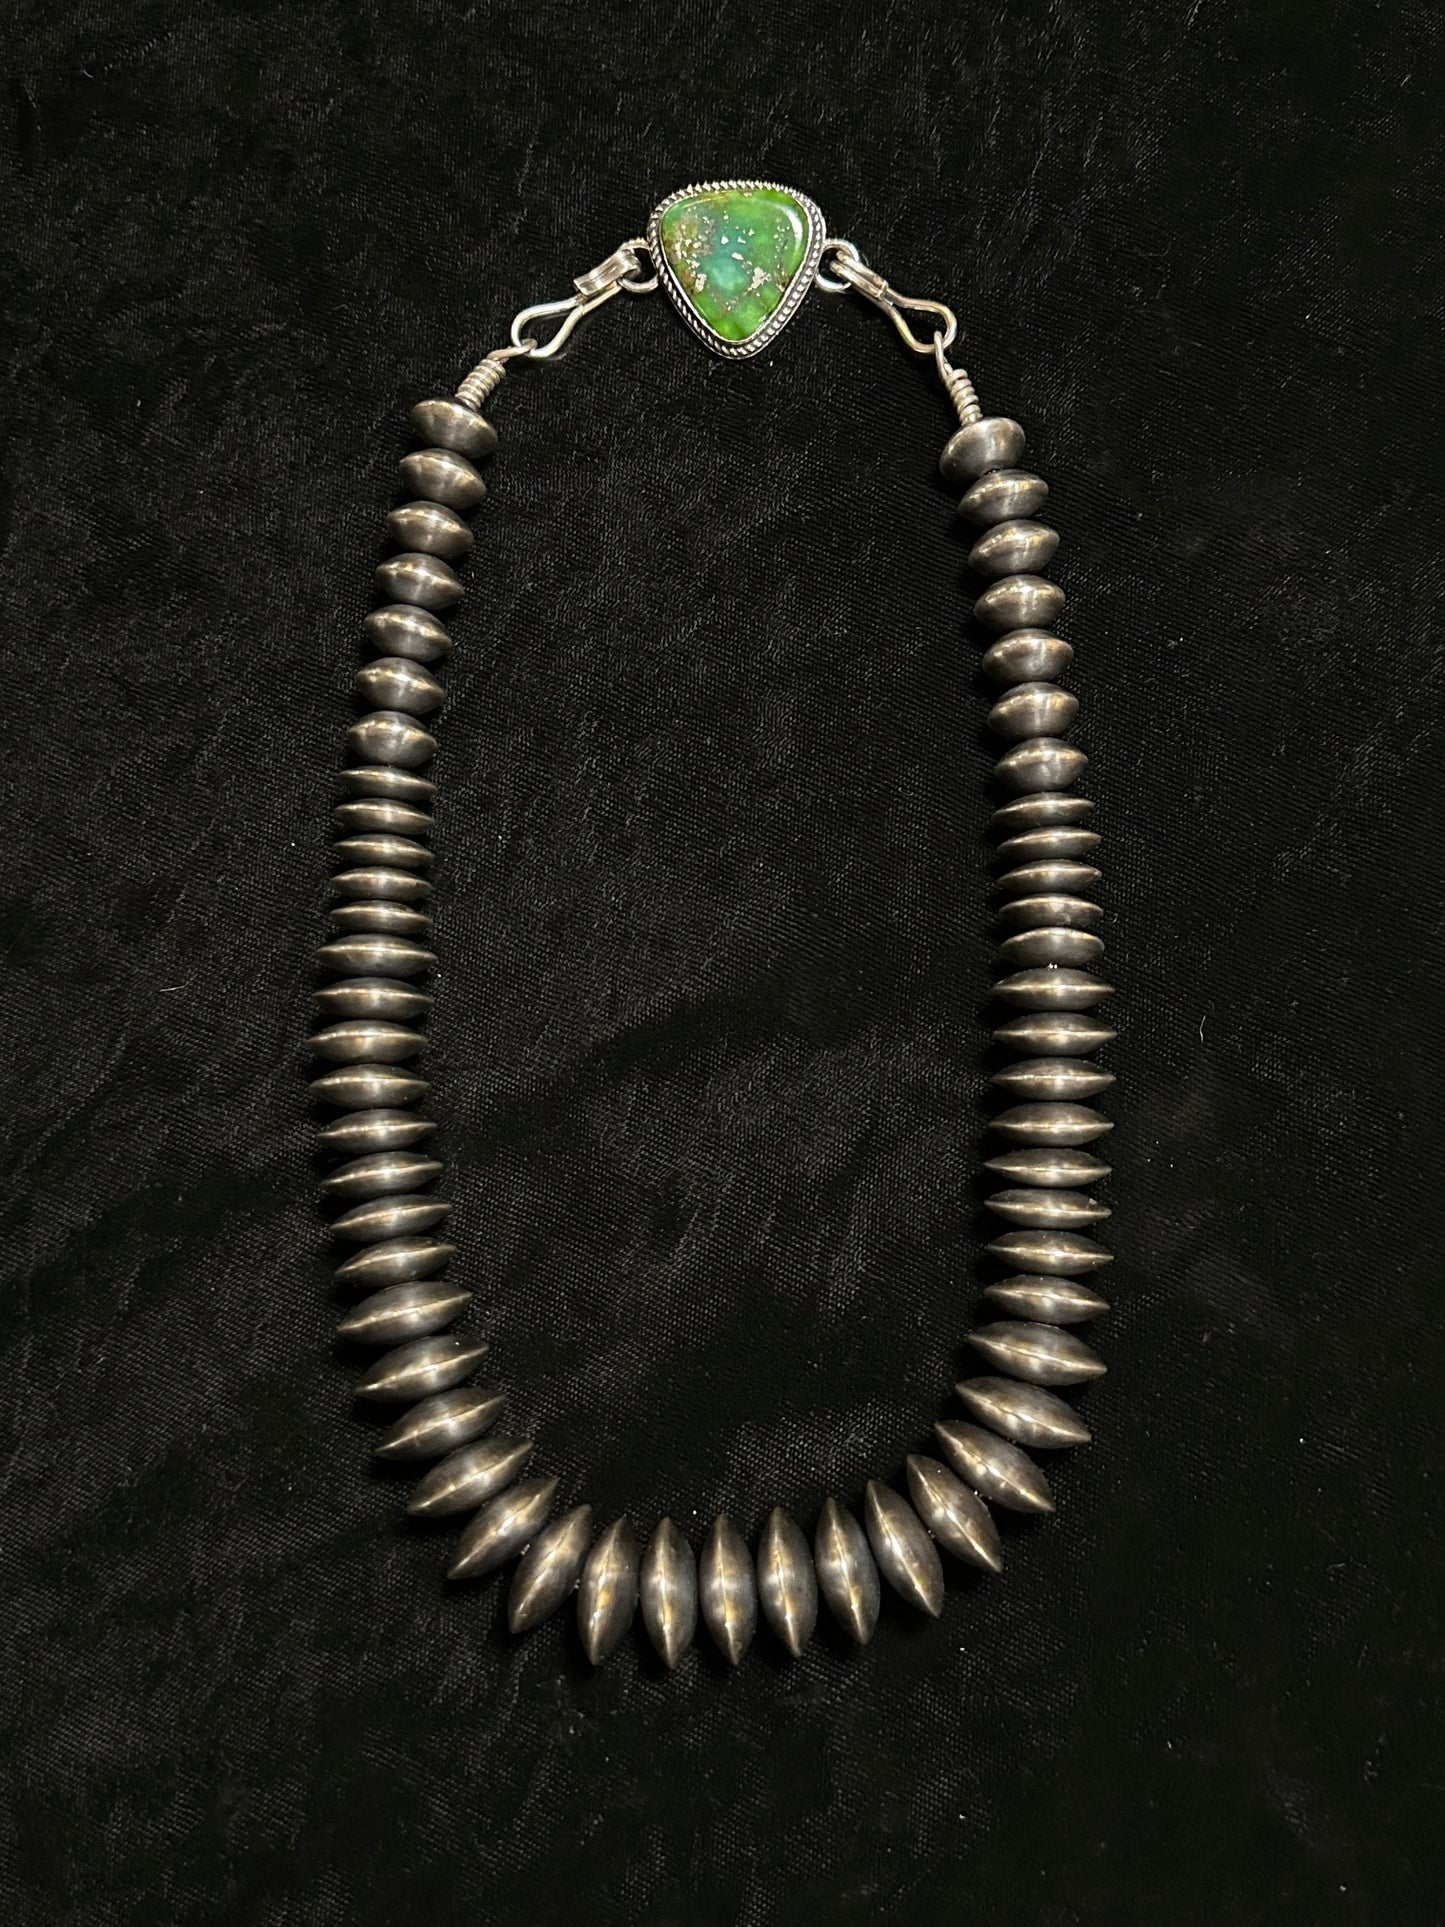 20" of Navajo Pearls 13mm-20mm with Sonoran Gold Stone by Tustin Daye